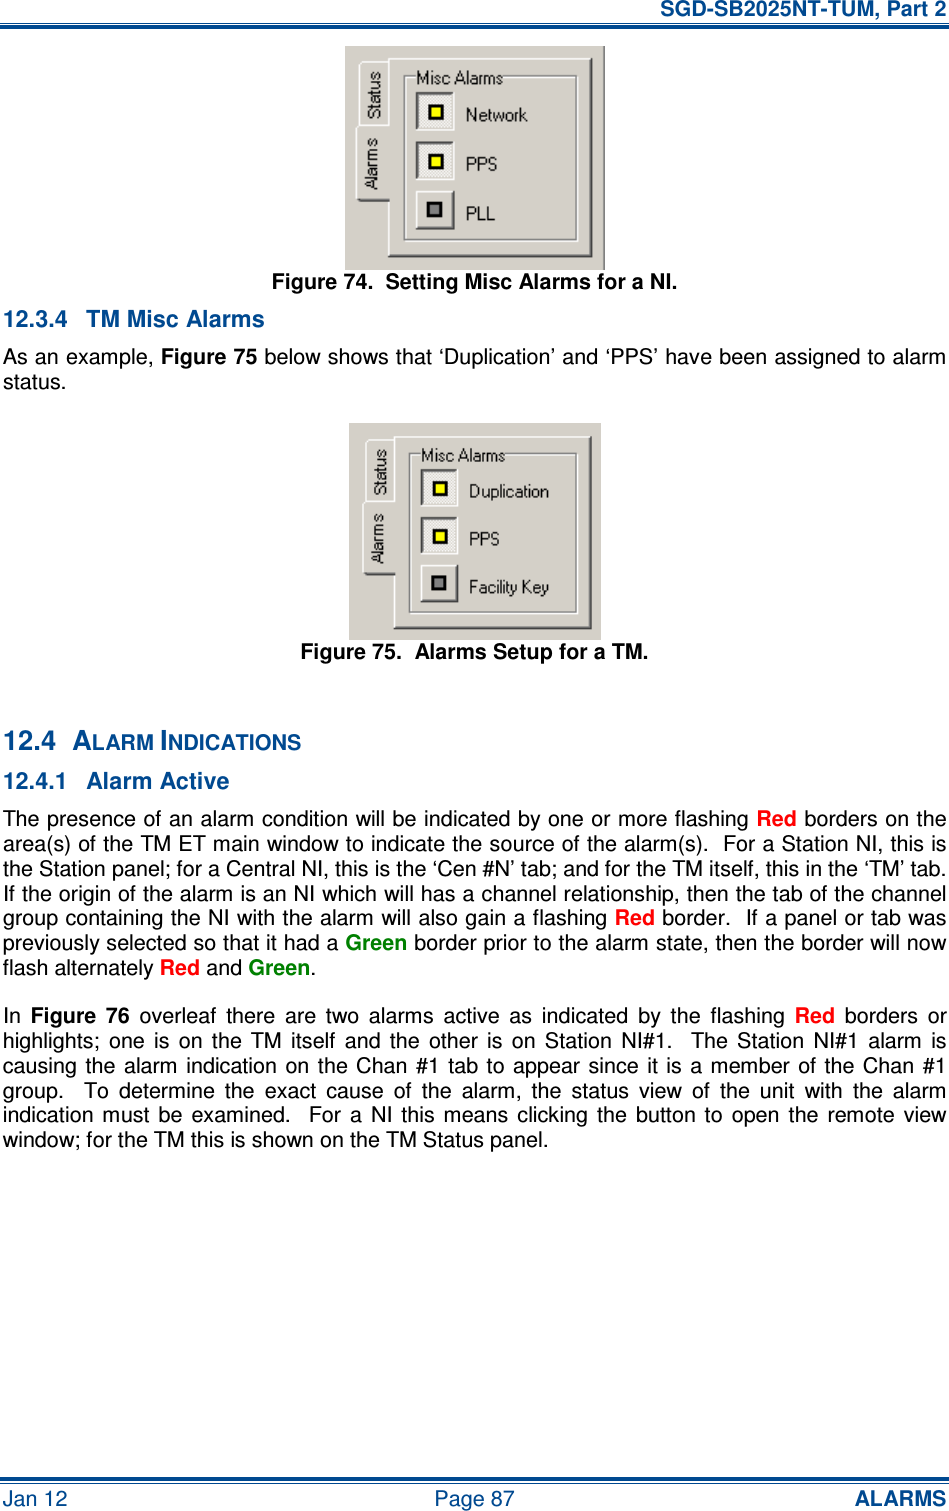   SGD-SB2025NT-TUM, Part 2 Jan 12  Page 87 ALARMS Figure 74.  Setting Misc Alarms for a NI. 12.3.4  TM Misc Alarms As an example, Figure 75 below shows that ‘Duplication’ and ‘PPS’ have been assigned to alarm status. Figure 75.  Alarms Setup for a TM.  12.4  ALARM INDICATIONS 12.4.1  Alarm Active The presence of an alarm condition will be indicated by one or more flashing Red borders on the area(s) of the TM ET main window to indicate the source of the alarm(s).  For a Station NI, this is the Station panel; for a Central NI, this is the ‘Cen #N’ tab; and for the TM itself, this in the ‘TM’ tab.  If the origin of the alarm is an NI which will has a channel relationship, then the tab of the channel group containing the NI with the alarm will also gain a flashing Red border.  If a panel or tab was previously selected so that it had a Green border prior to the alarm state, then the border will now flash alternately Red and Green. In  Figure  76  overleaf  there  are  two  alarms  active  as  indicated  by  the  flashing Red  borders  or highlights;  one  is  on  the  TM  itself  and  the  other  is  on  Station  NI#1.    The  Station  NI#1  alarm  is causing the alarm indication on  the Chan  #1  tab to  appear  since  it is a member  of the Chan #1 group.    To  determine  the  exact  cause  of  the  alarm,  the  status  view  of  the  unit  with  the  alarm indication must  be  examined.    For  a  NI  this means  clicking  the  button to  open  the  remote  view window; for the TM this is shown on the TM Status panel. 